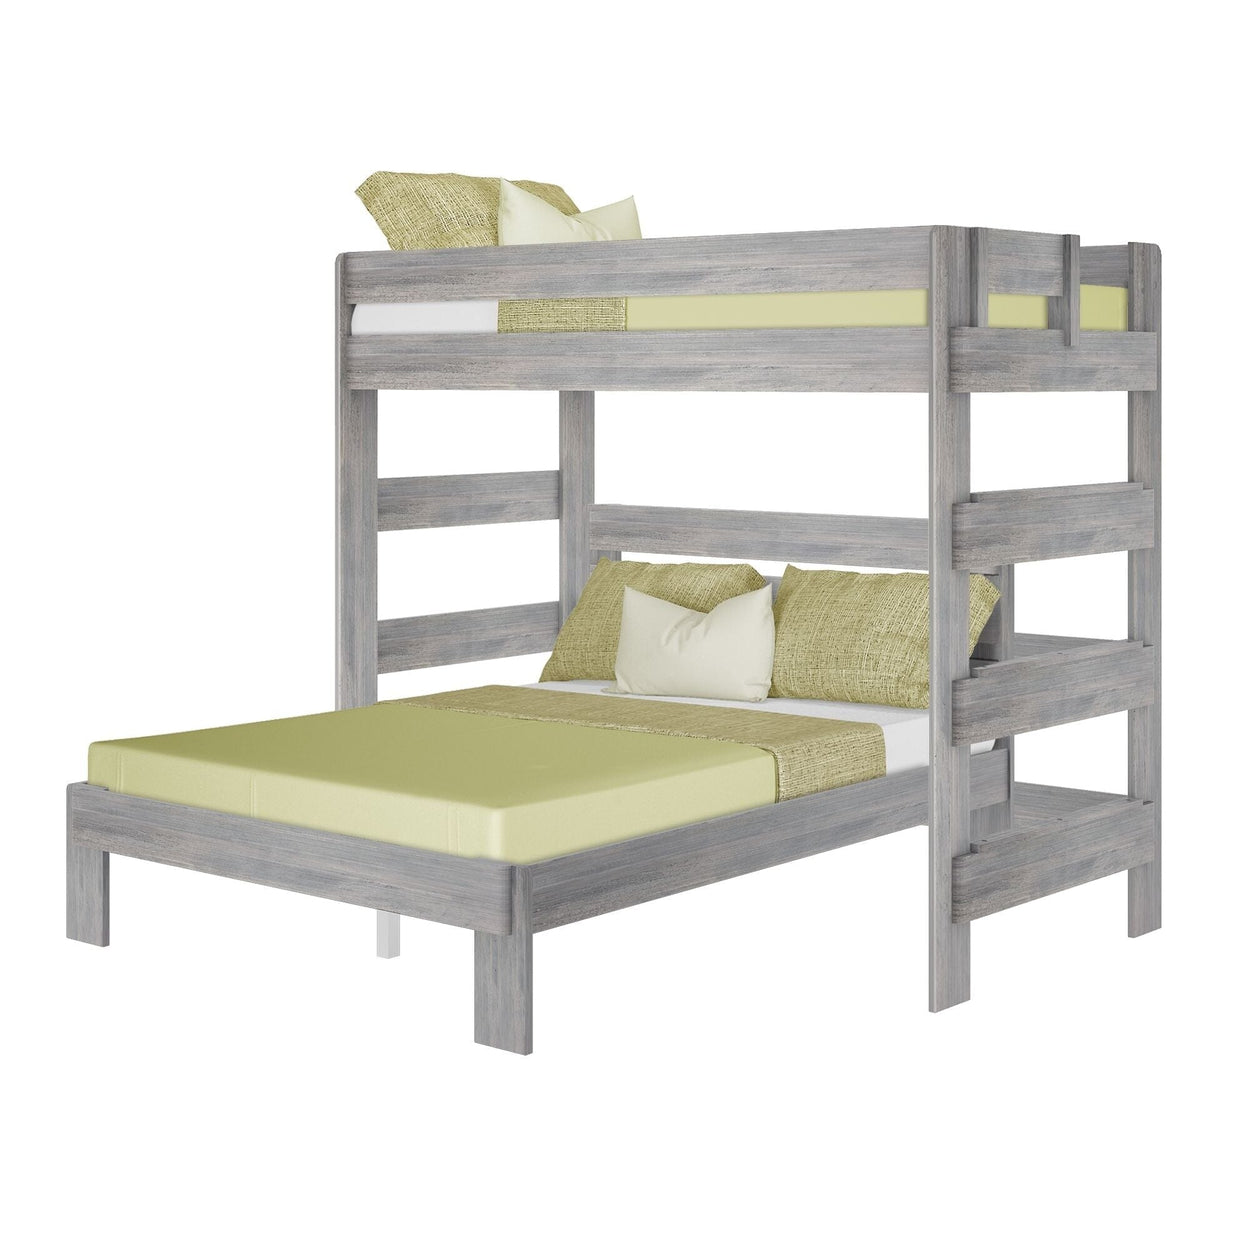 19-813-185 : Bunk Beds Farmhouse Twin over Queen L-Shaped Bunk Bed, Driftwood